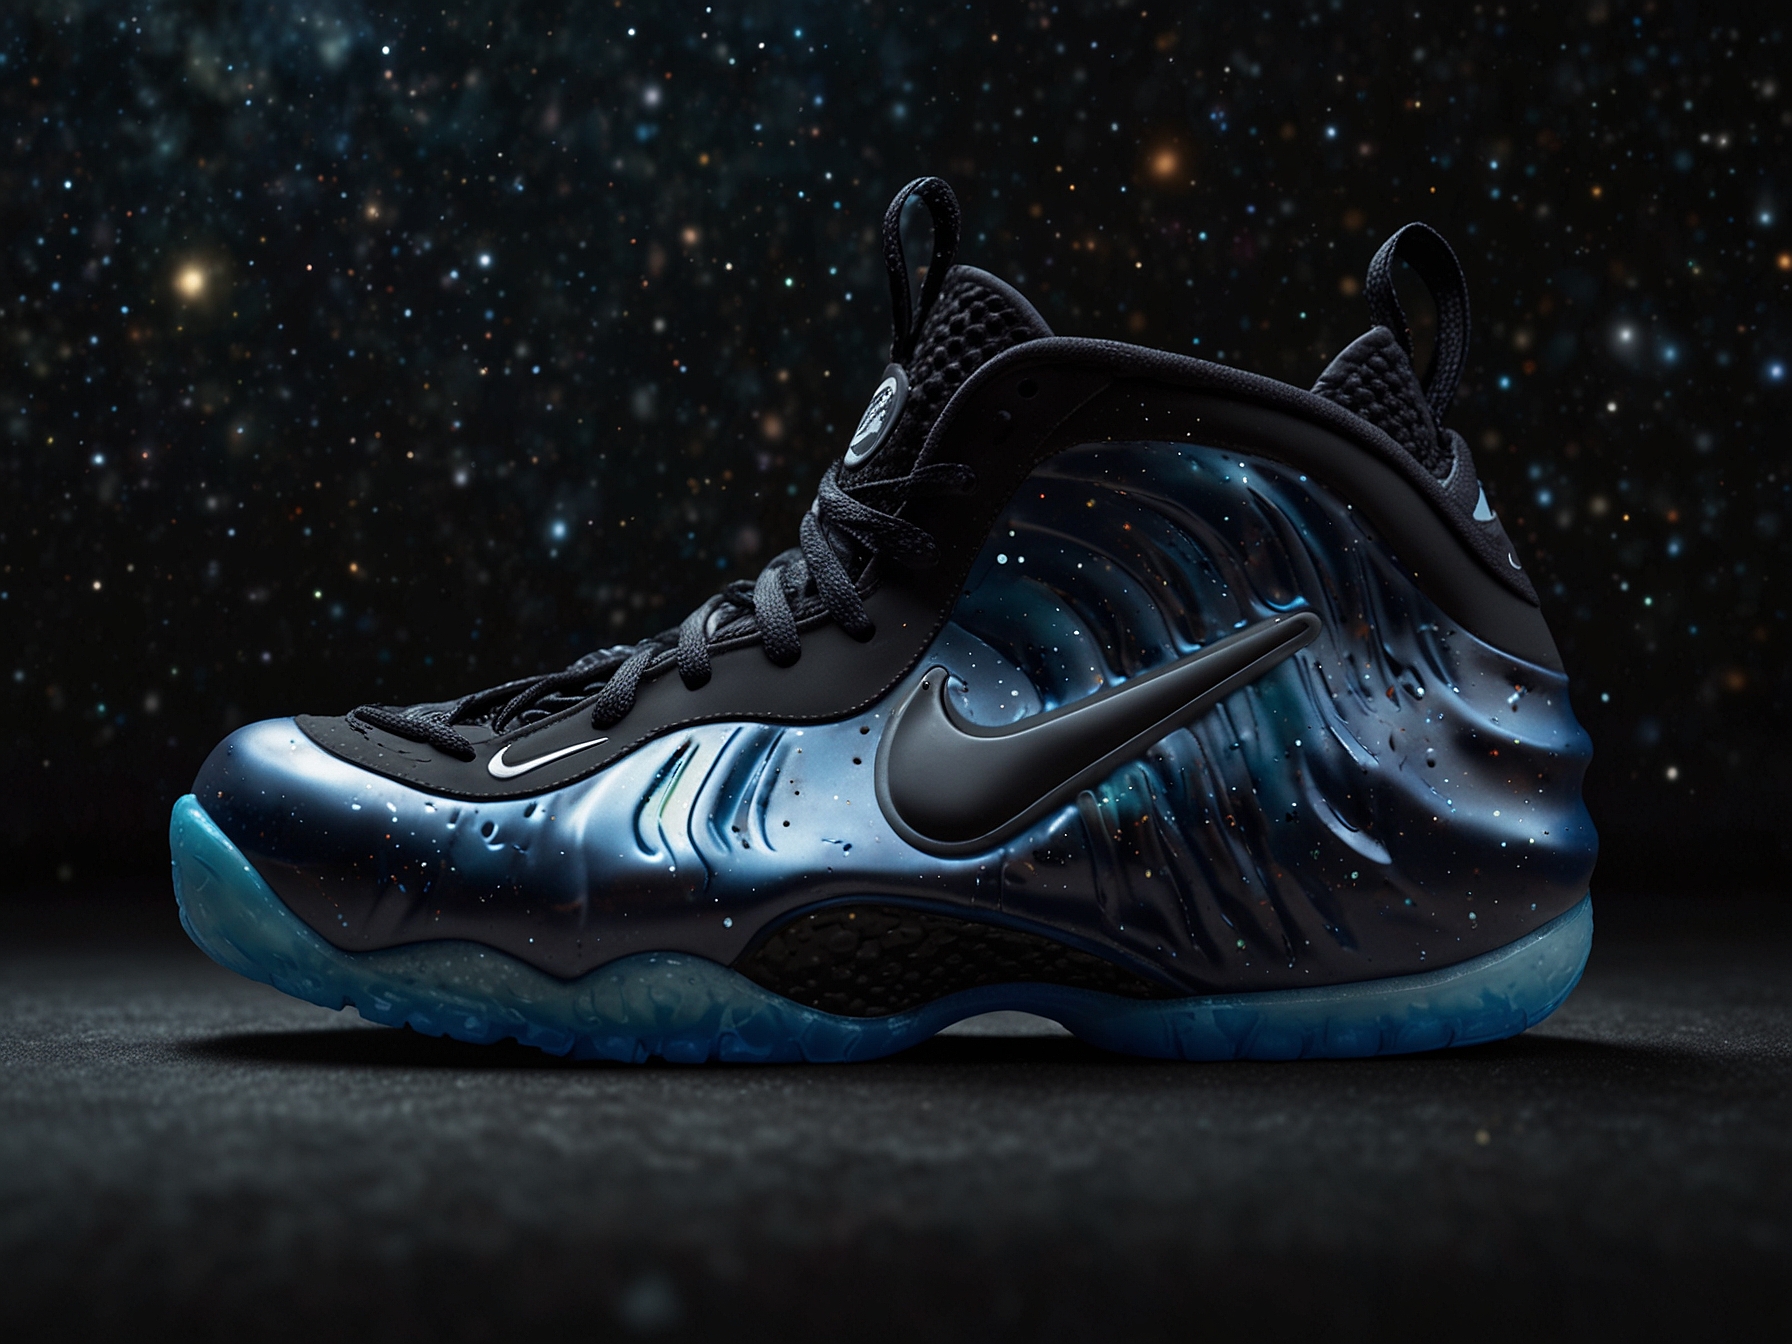 An official look at the returning Nike Air Foamposite One 'Galaxy,' featuring space-themed graphics and a glow-in-the-dark outsole, showcased during the SNKRS Showcase livestream.